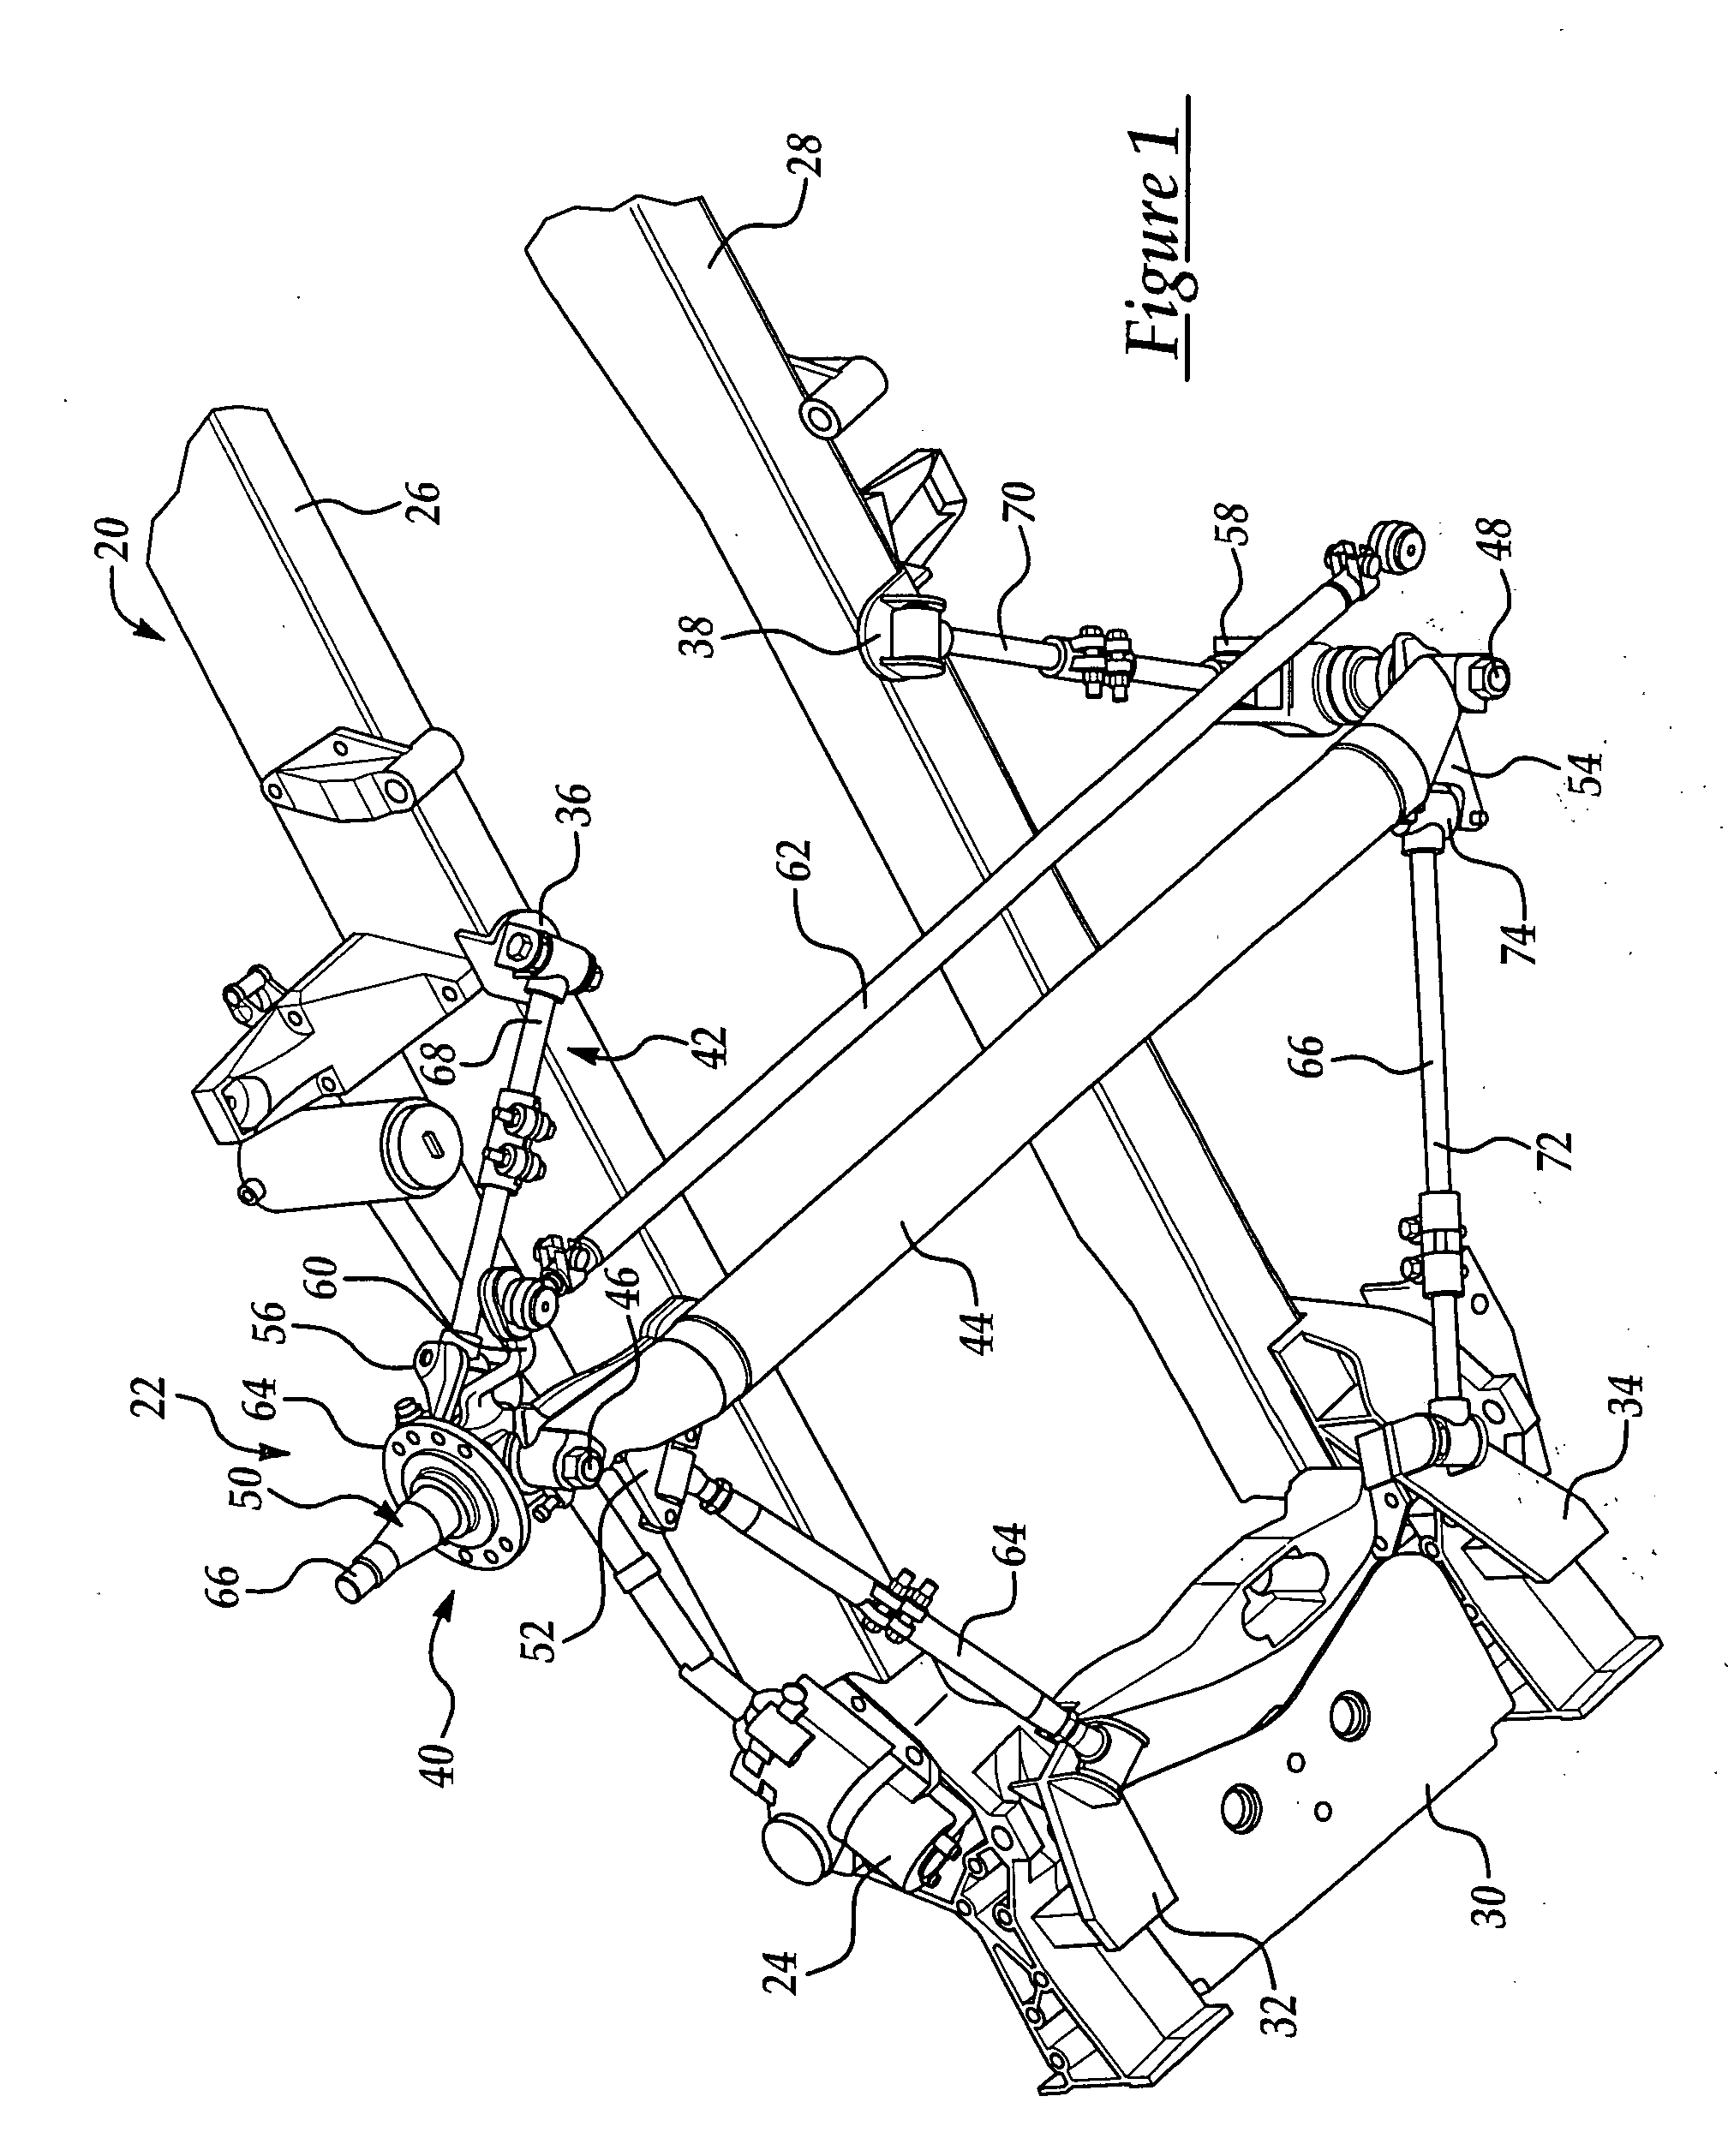 Beam axle suspension with diagonal link